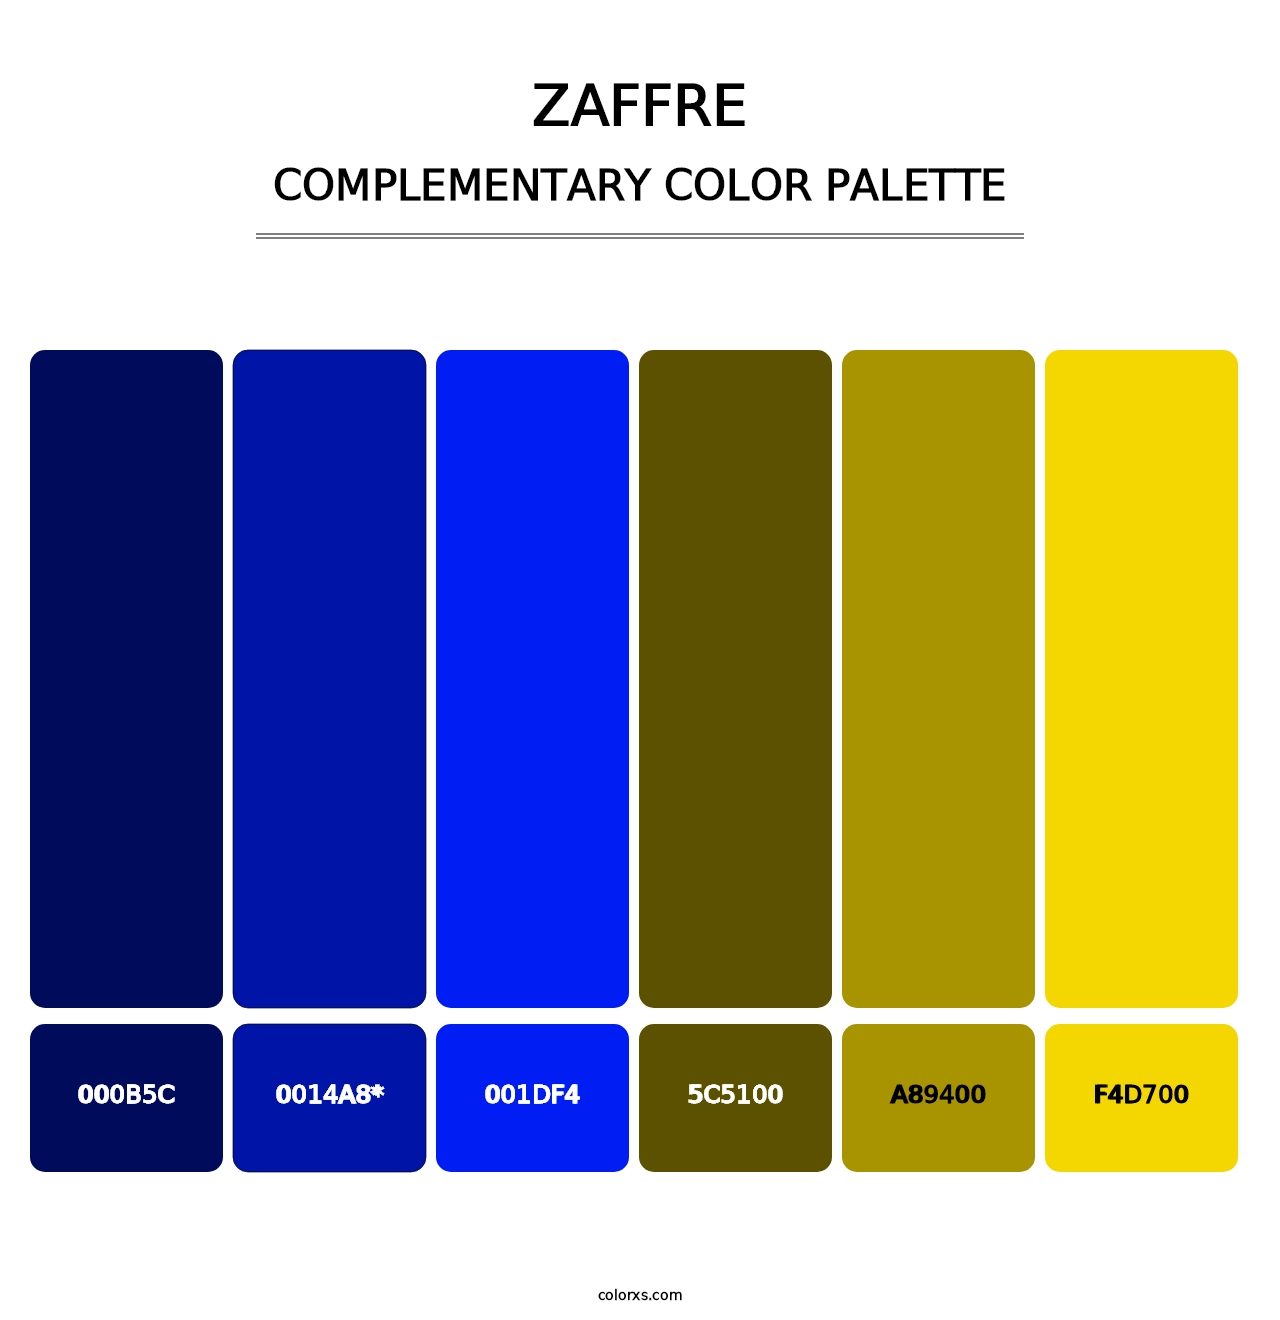 Zaffre - Complementary Color Palette